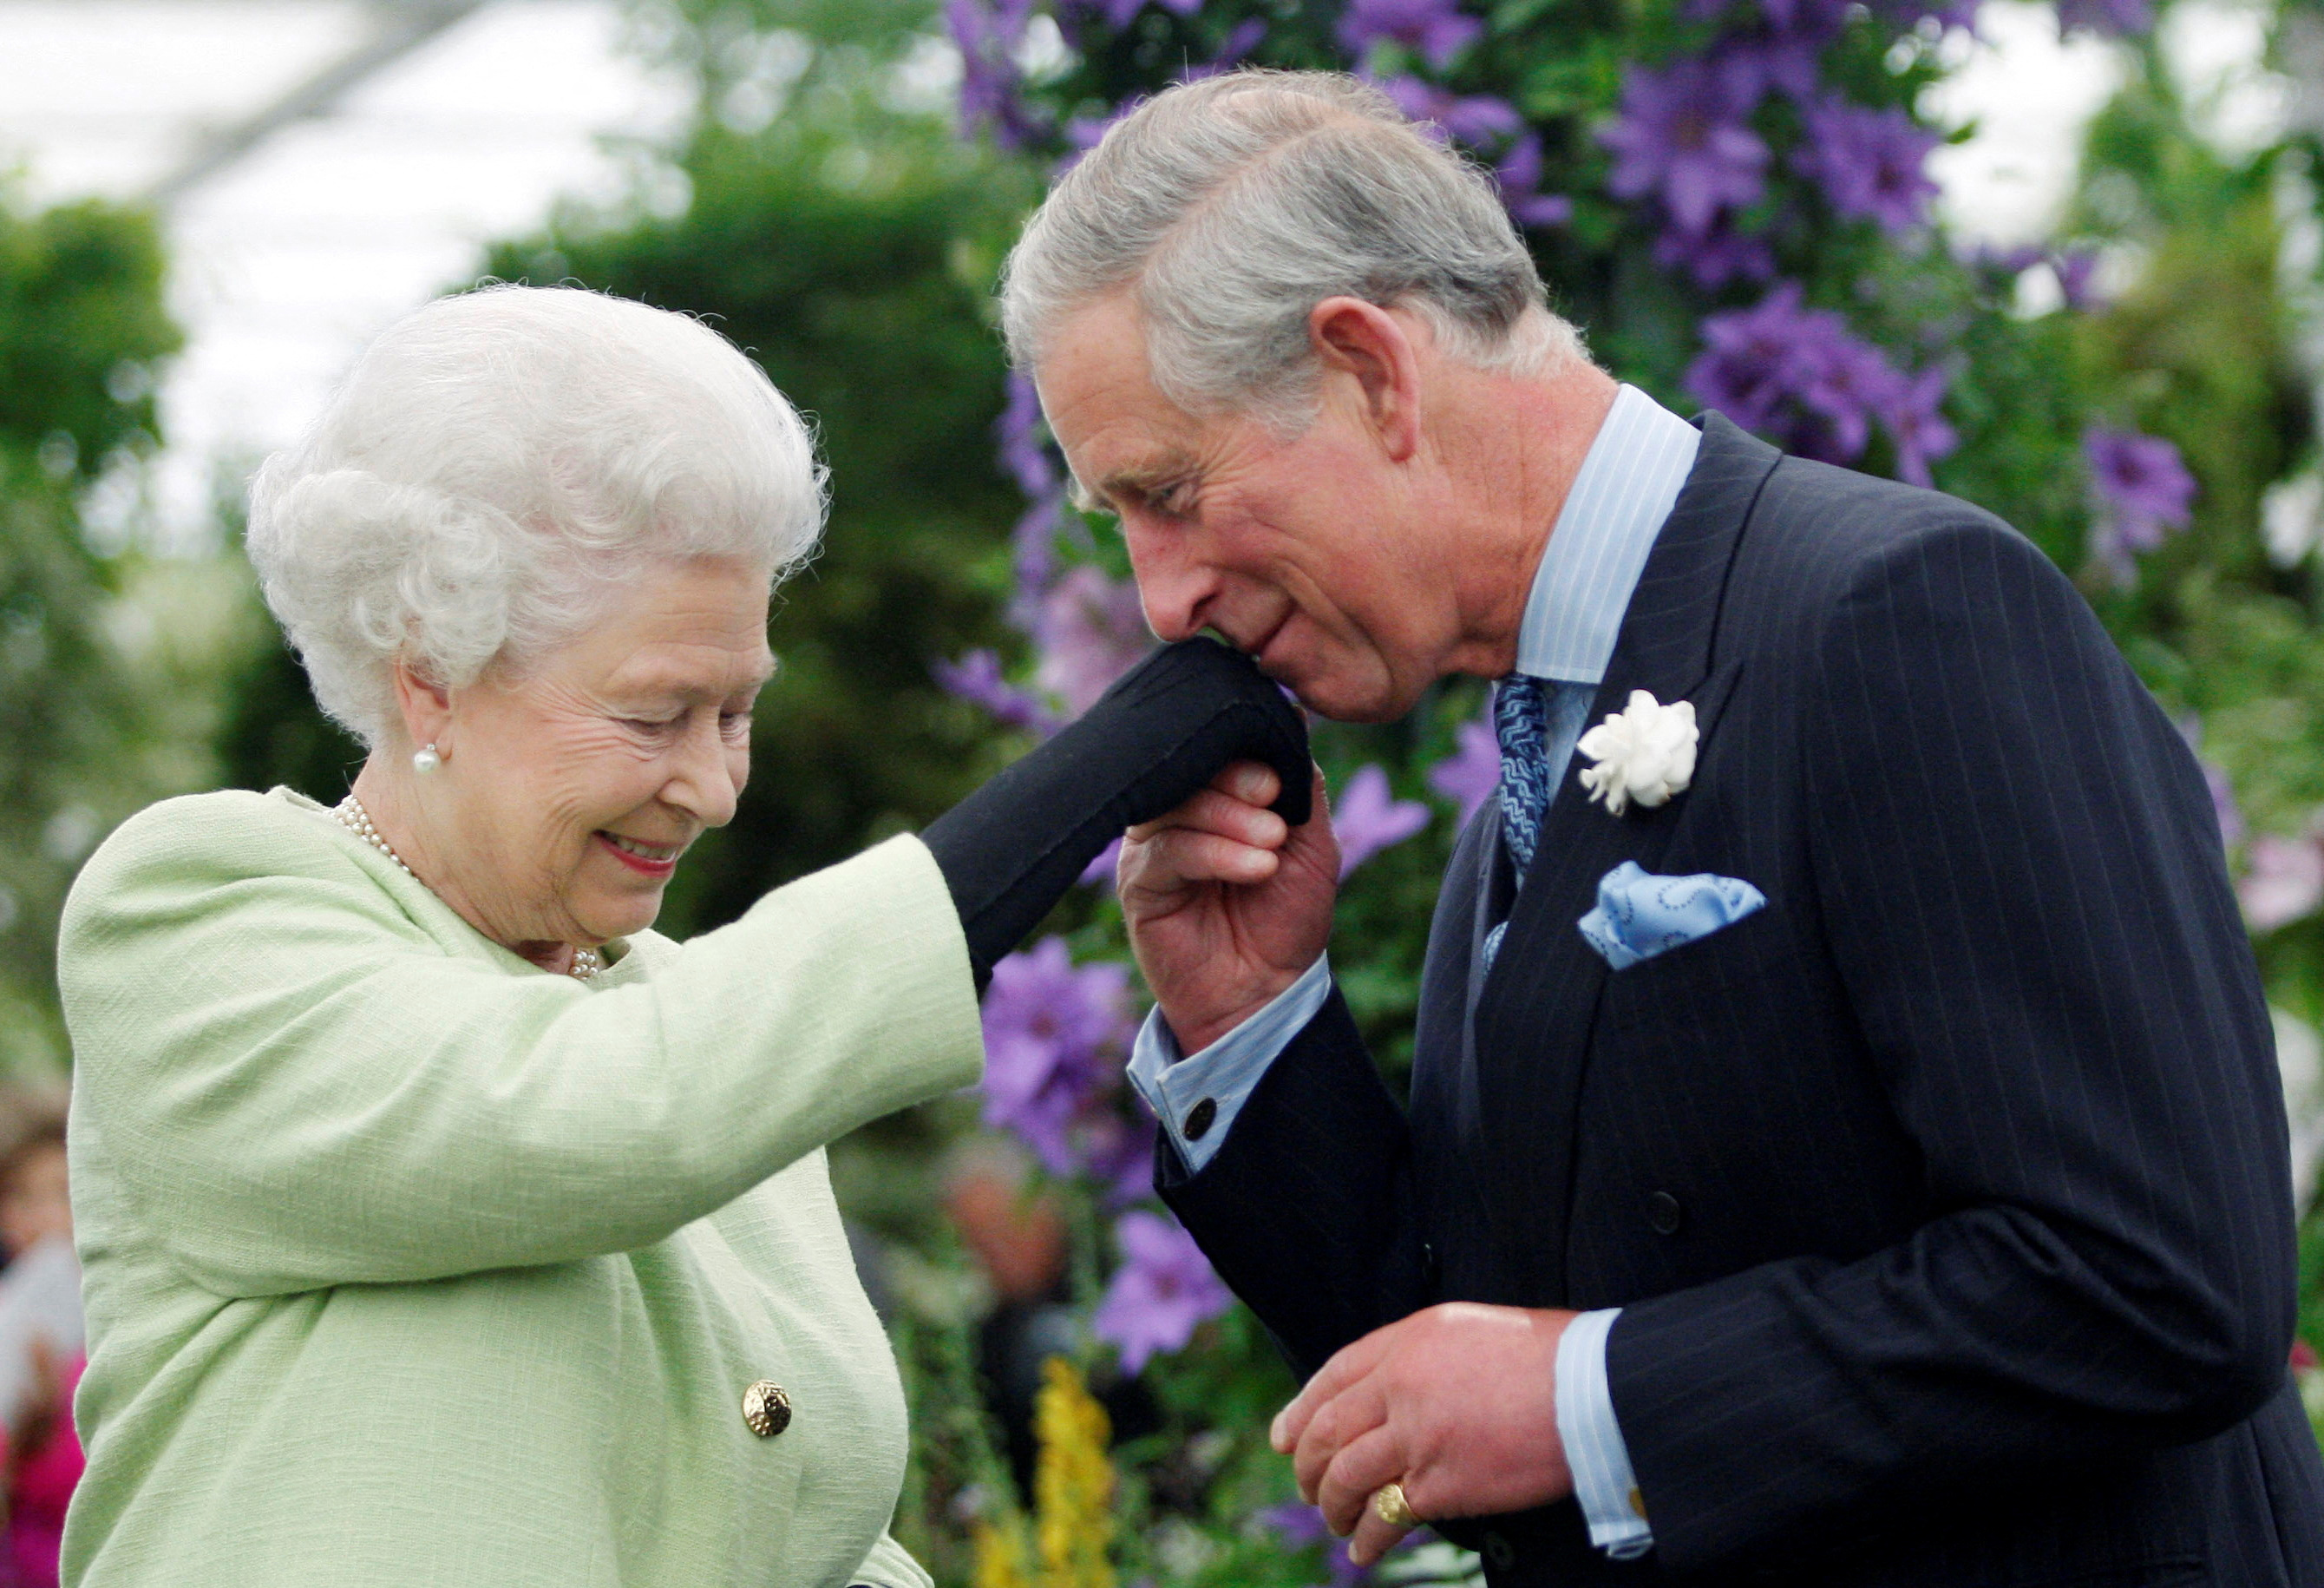 Britain's Prince Charles kisses hand of Queen Elizabeth after she presented him with Royal Horticultural Society Victoria Medal of Honour in London